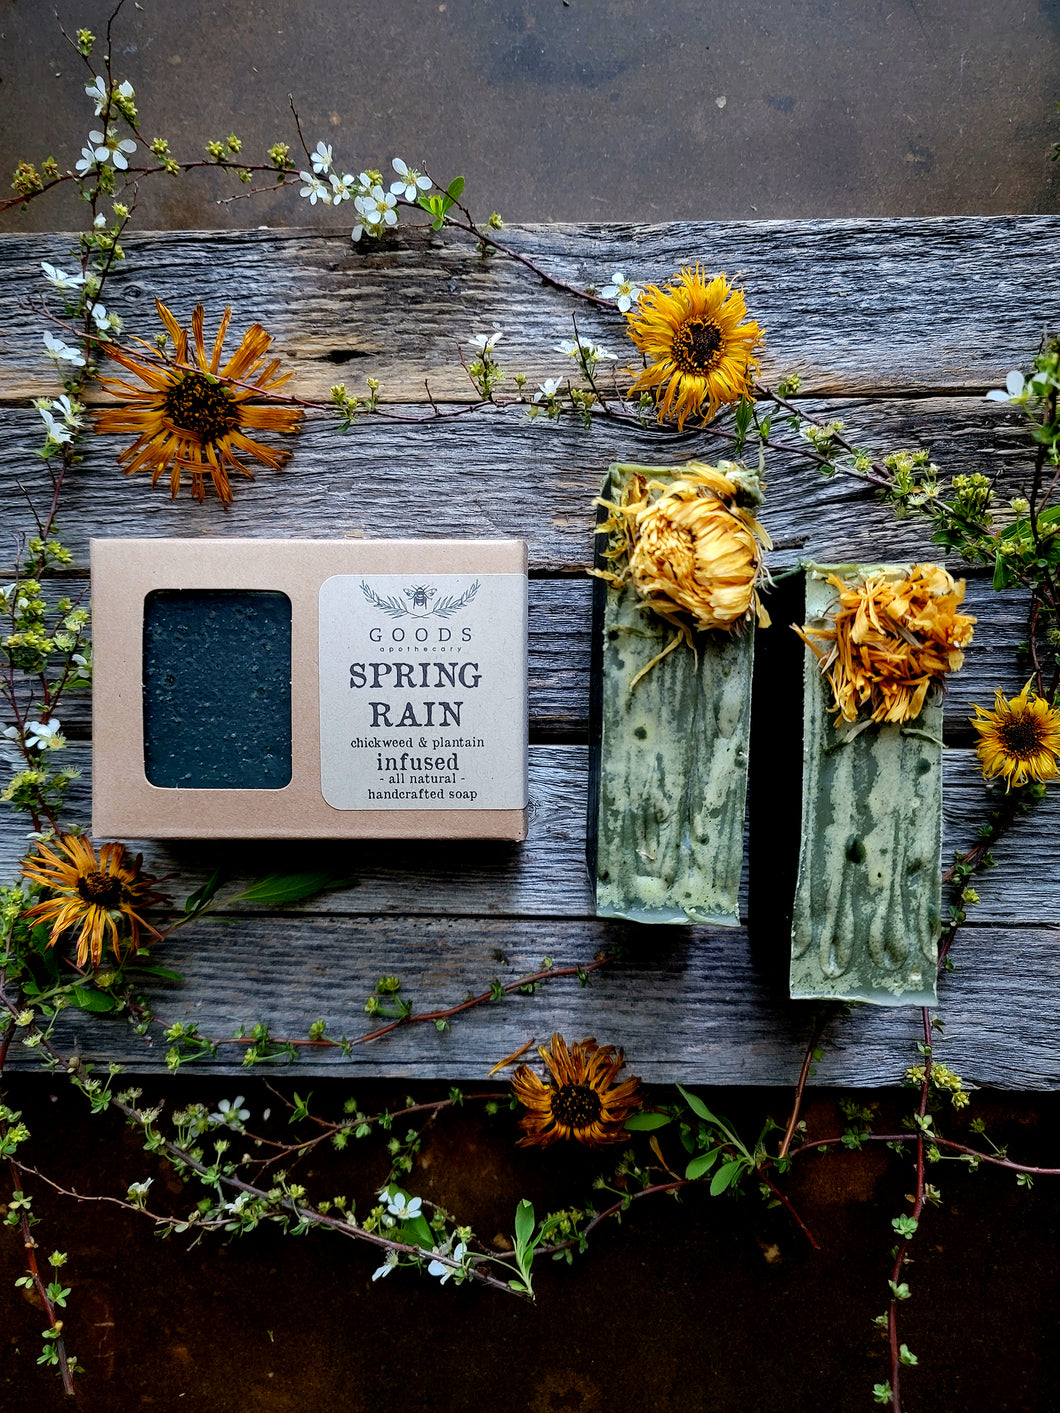 Spring Rain Handcrafted Soap